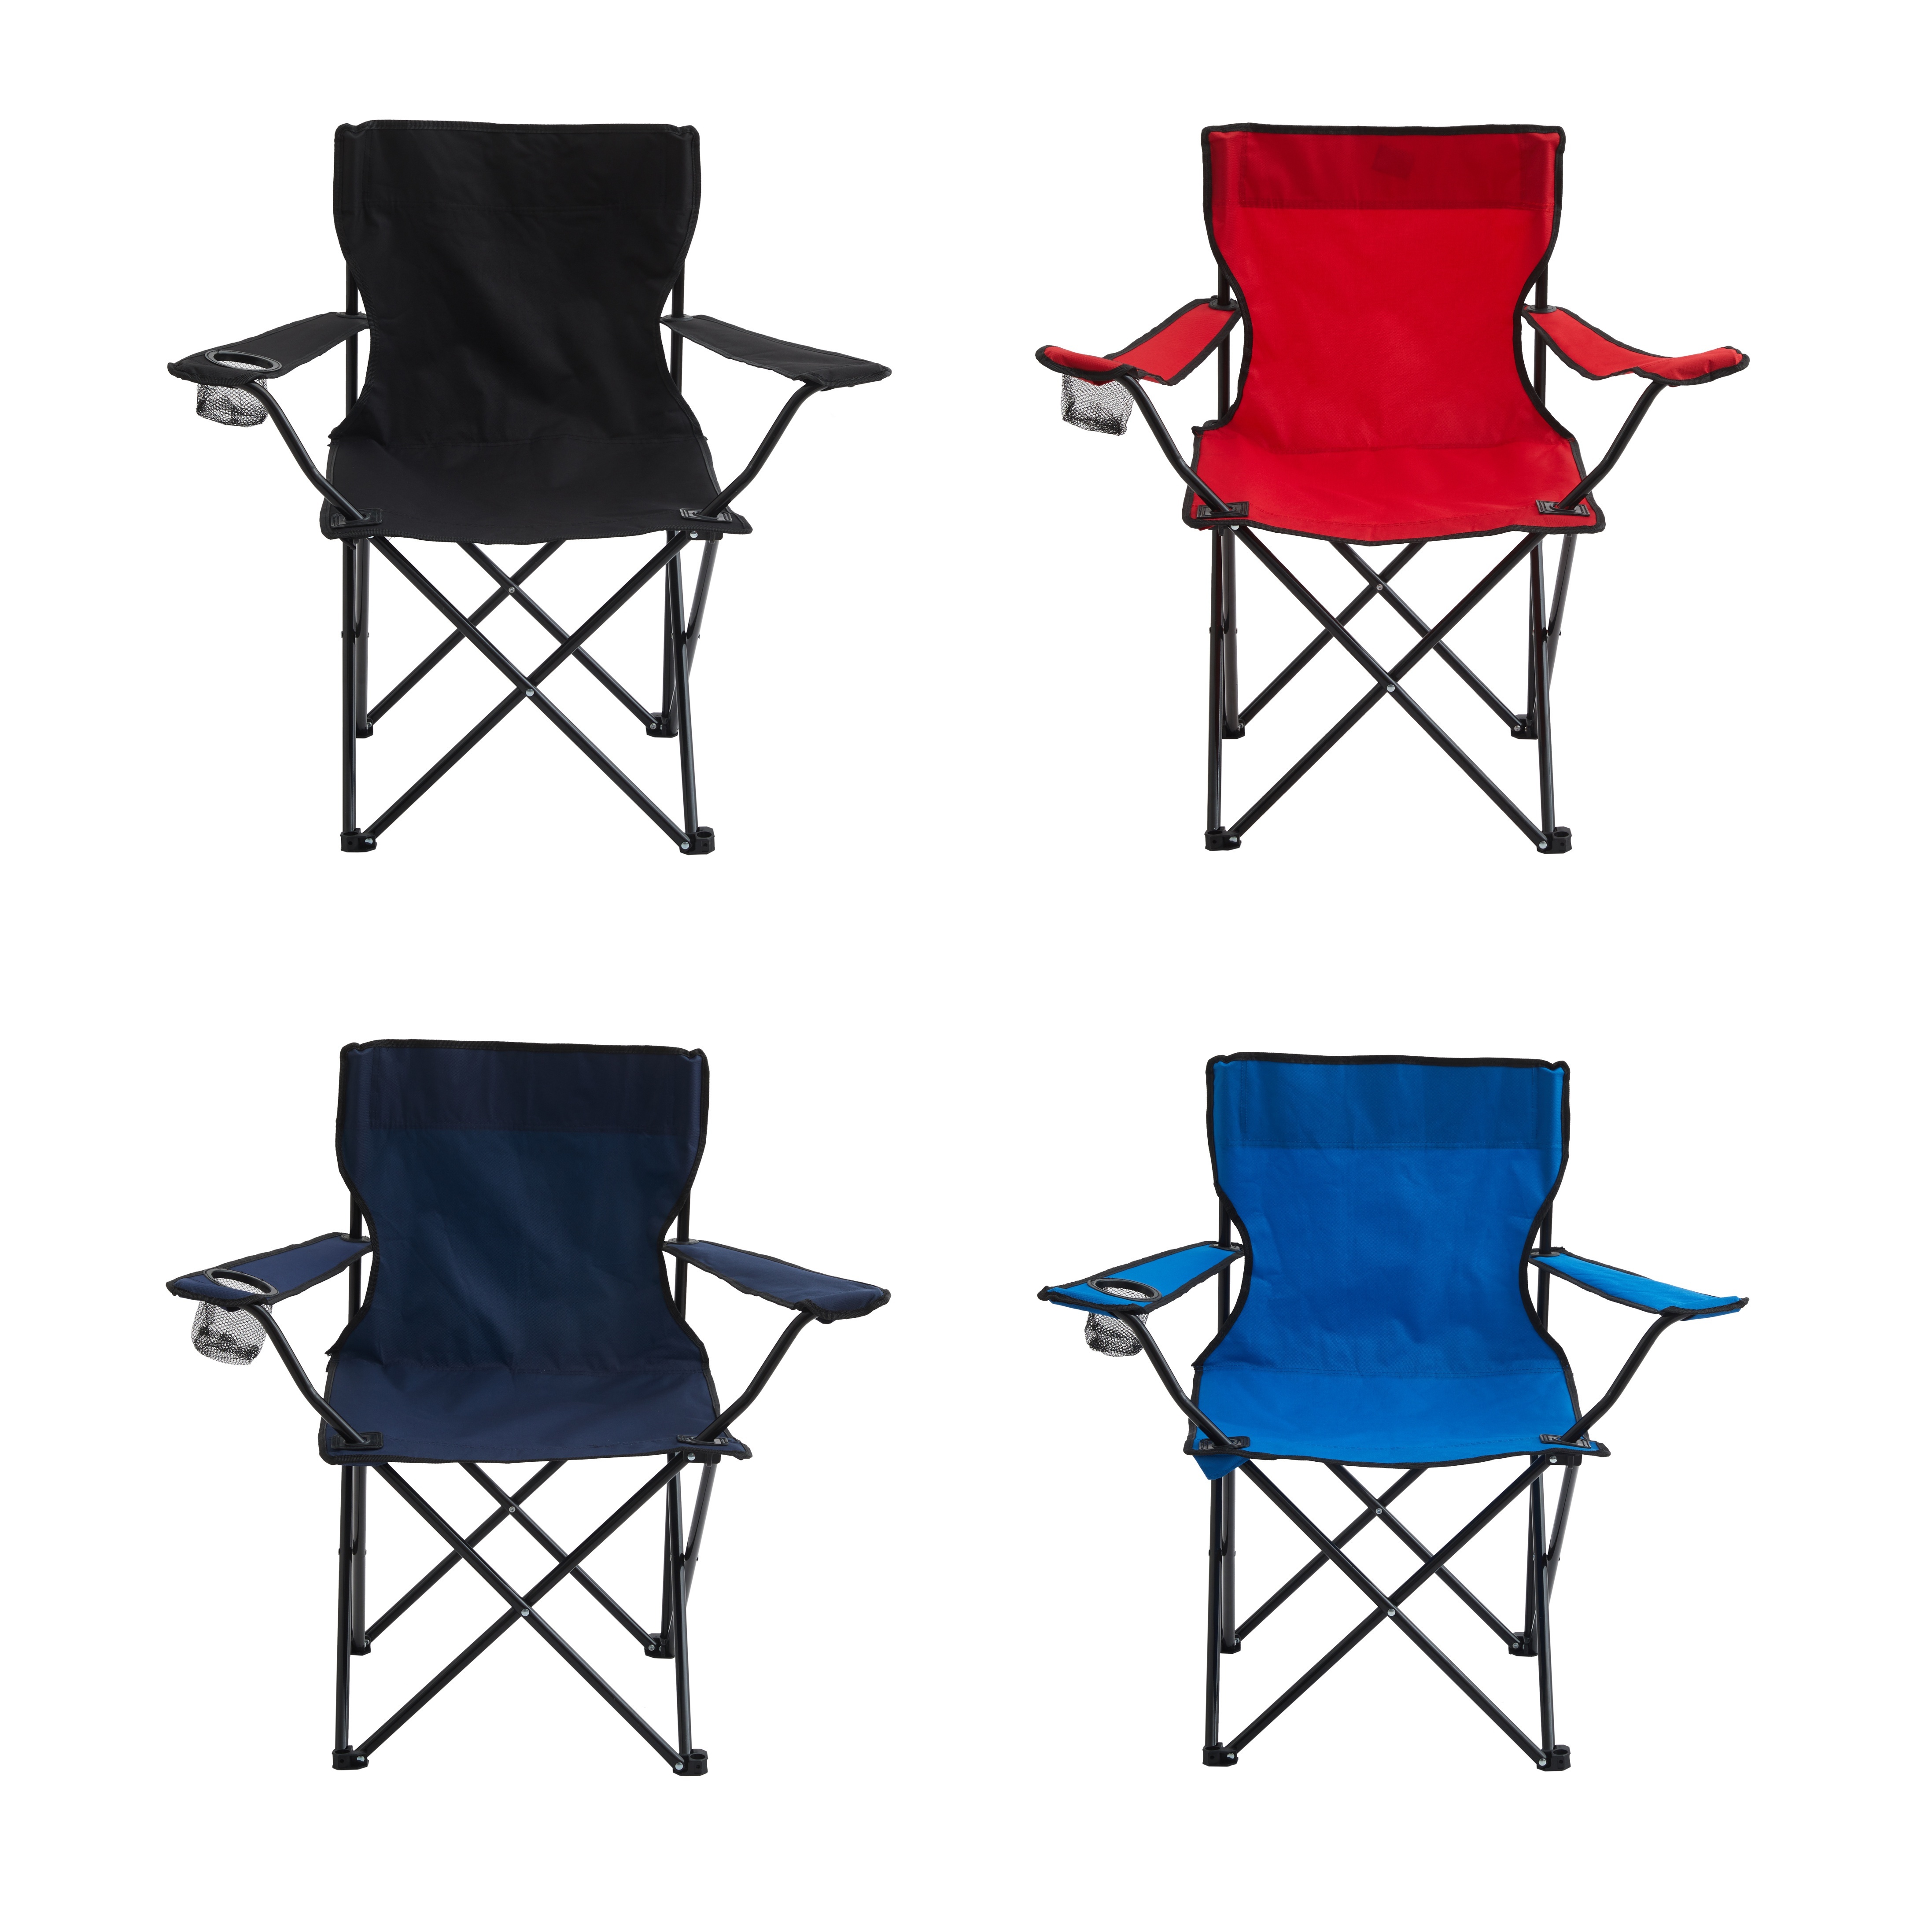 1pc Outdoor Lightweight Folding Chair Leisure Portable Chairs For Outdoor  Camping With Cup Holder And Carrying Bag, Today's Best Daily Deals